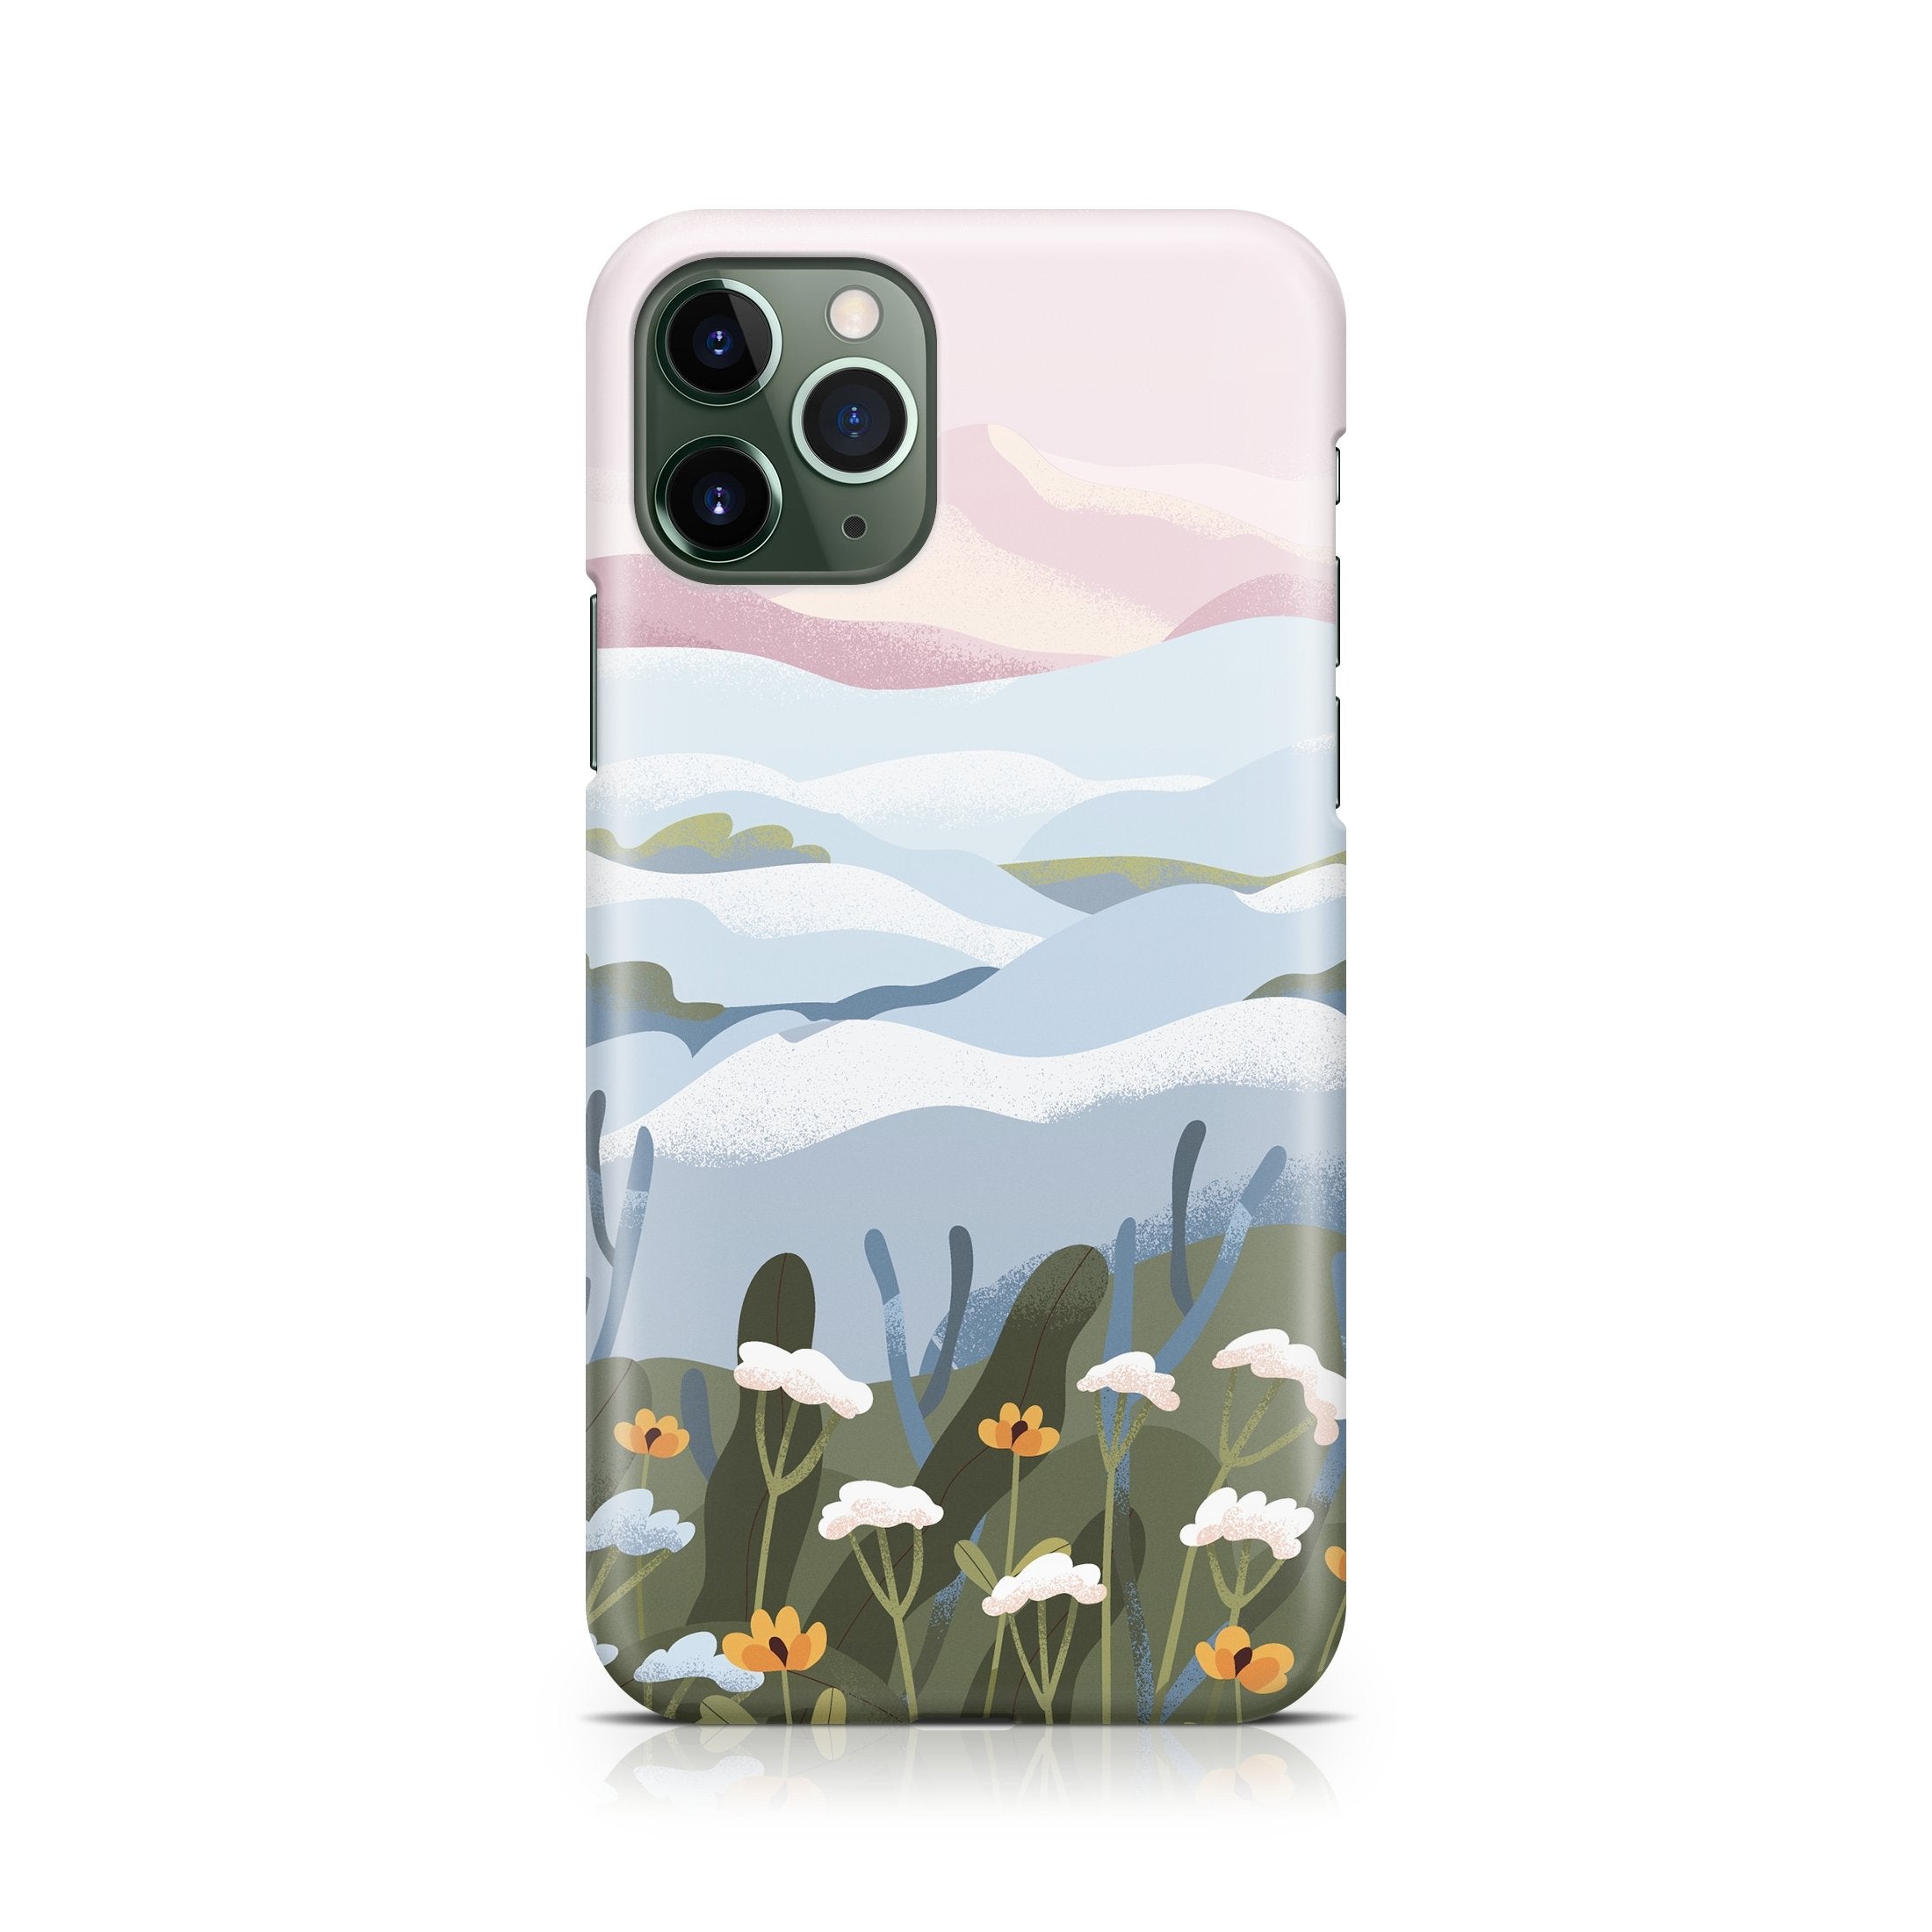 Watercolor Nature - iPhone phone case designs by CaseSwagger